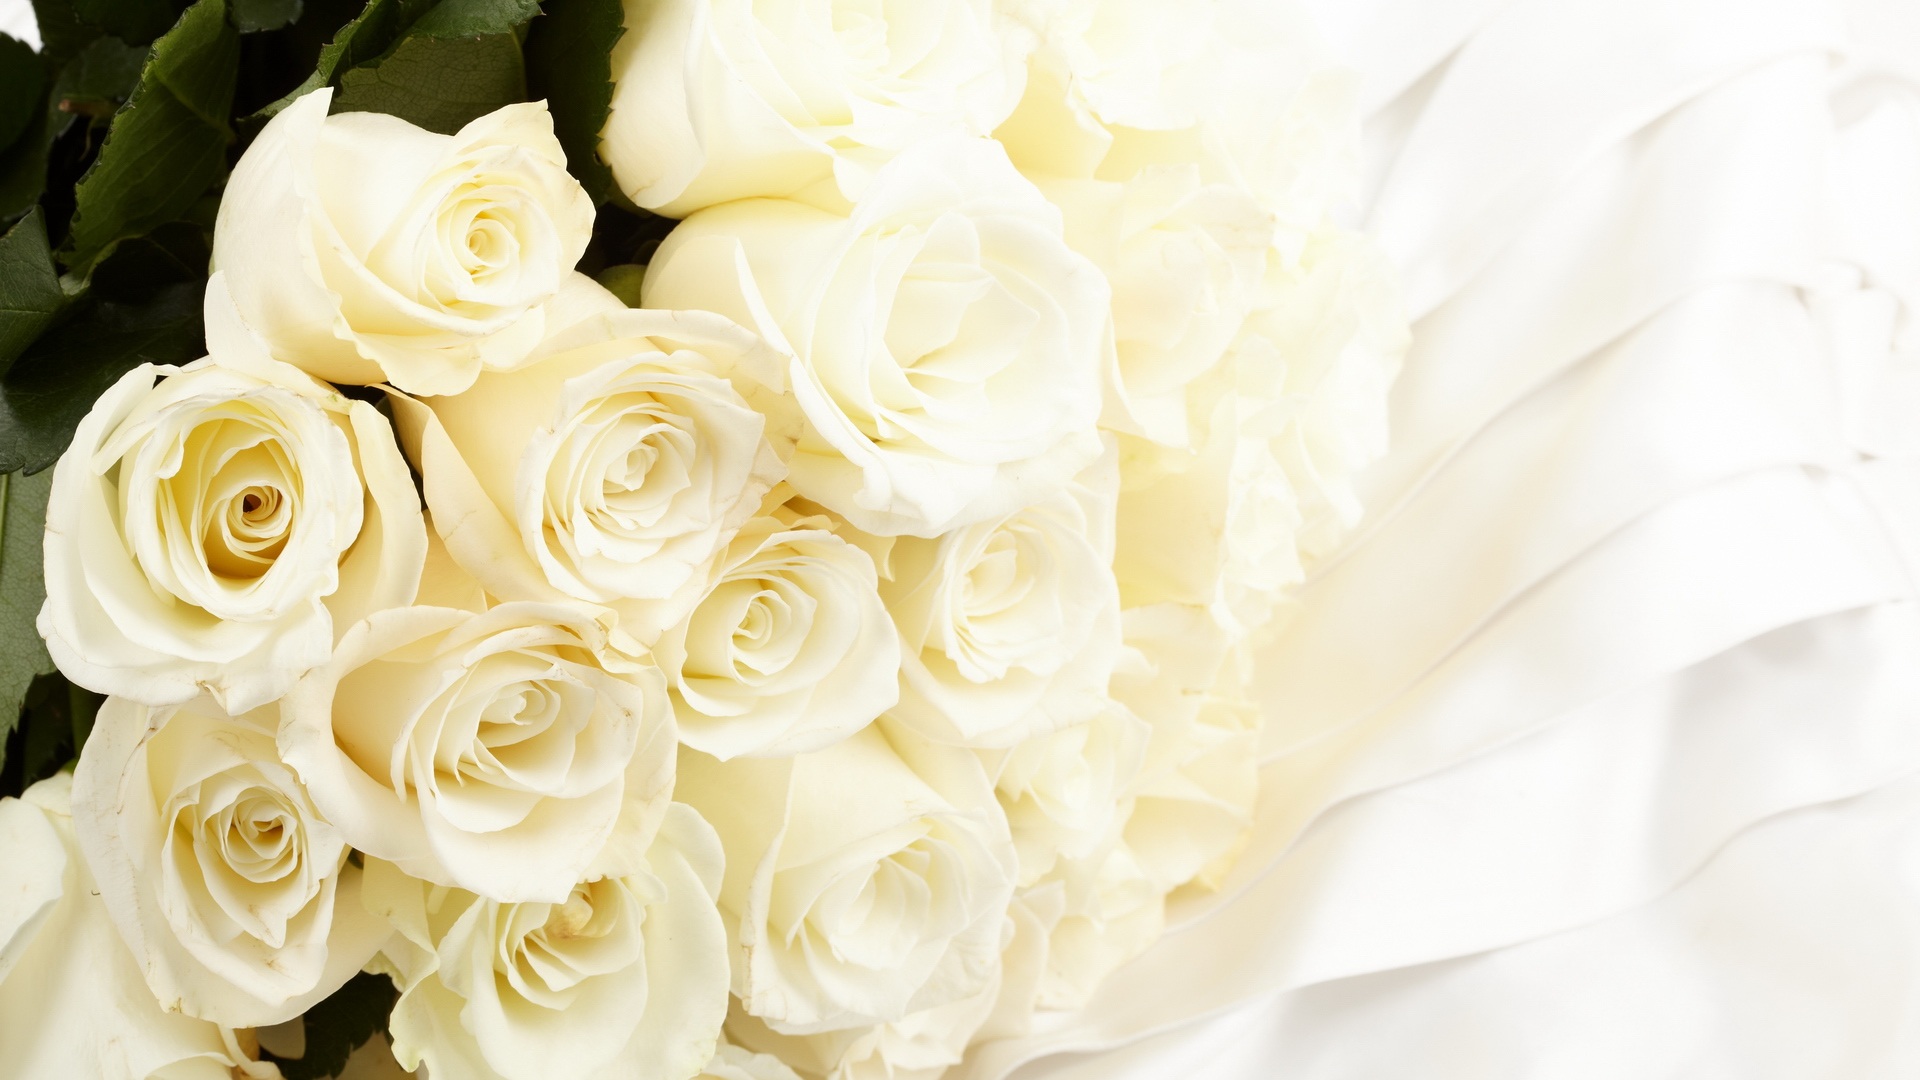 Pure White Rose Wallpaper - Bunch Of White Roses - HD Wallpaper 